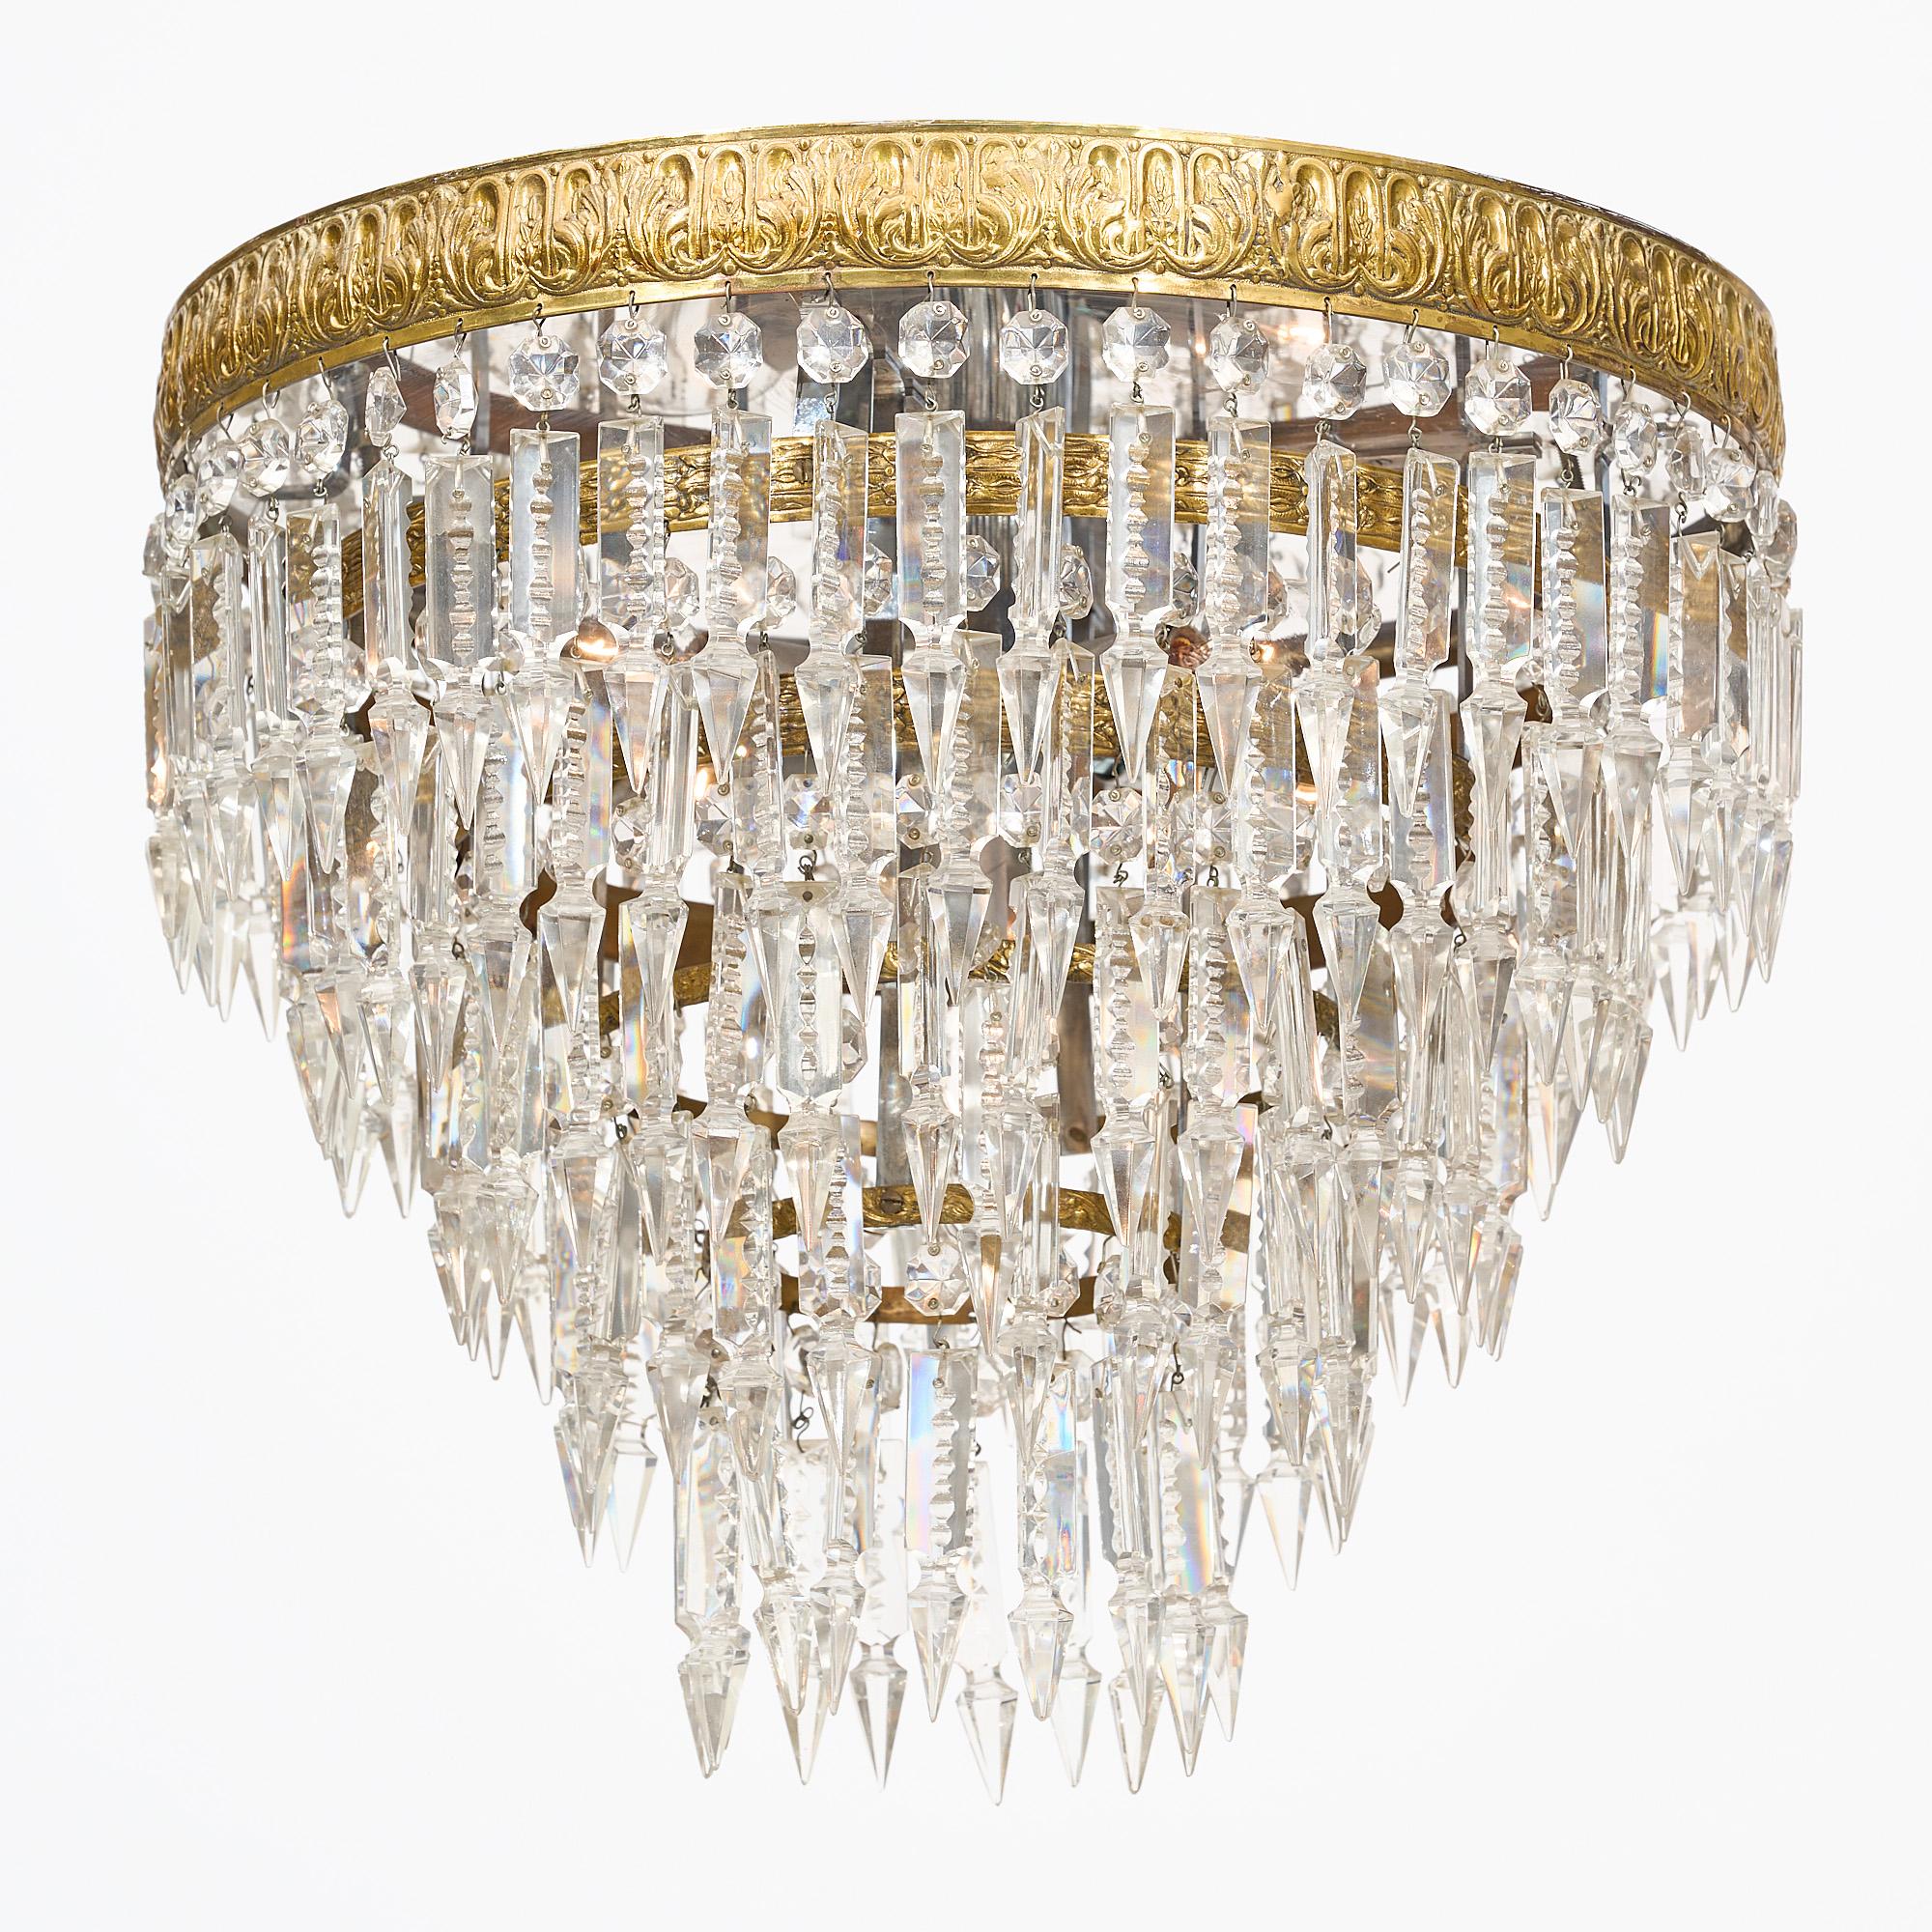 Exquisite pair of antique French Baccarat chandeliers from Paris. Adorned with meticulously cut crystal pendants, delicately suspended from embossed stacked crowns, these captivating fixtures exude timeless elegance. This pair features intricate